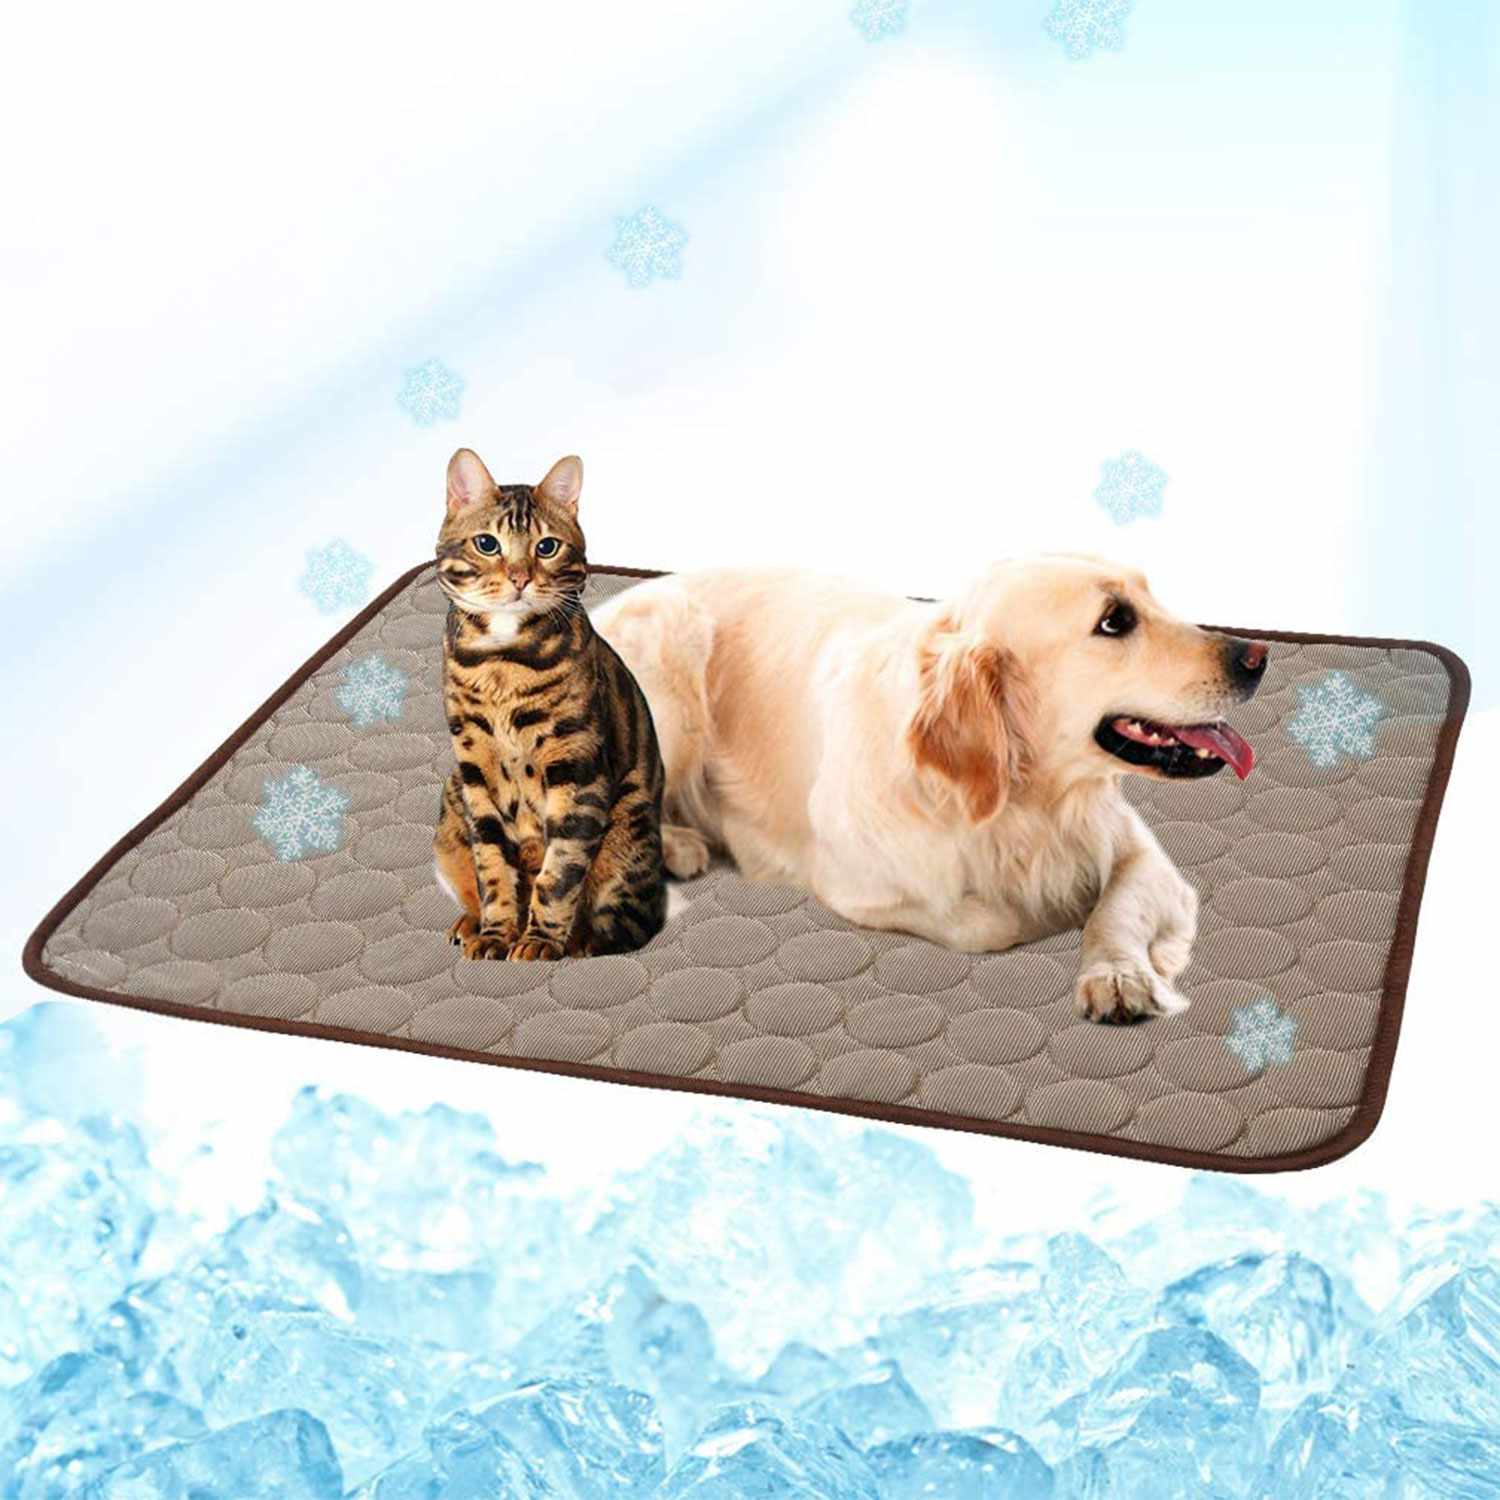 Keep Your Dog Cool and Reduce Joint Pain Glumes Dog Cooling Mat Machine Washable Pet Cats Dogs Cooling Pad Activated Gel Extra Large Cooling Pad for Dogs & Pets Dog Accessories No Need To Freeze Or Chill L